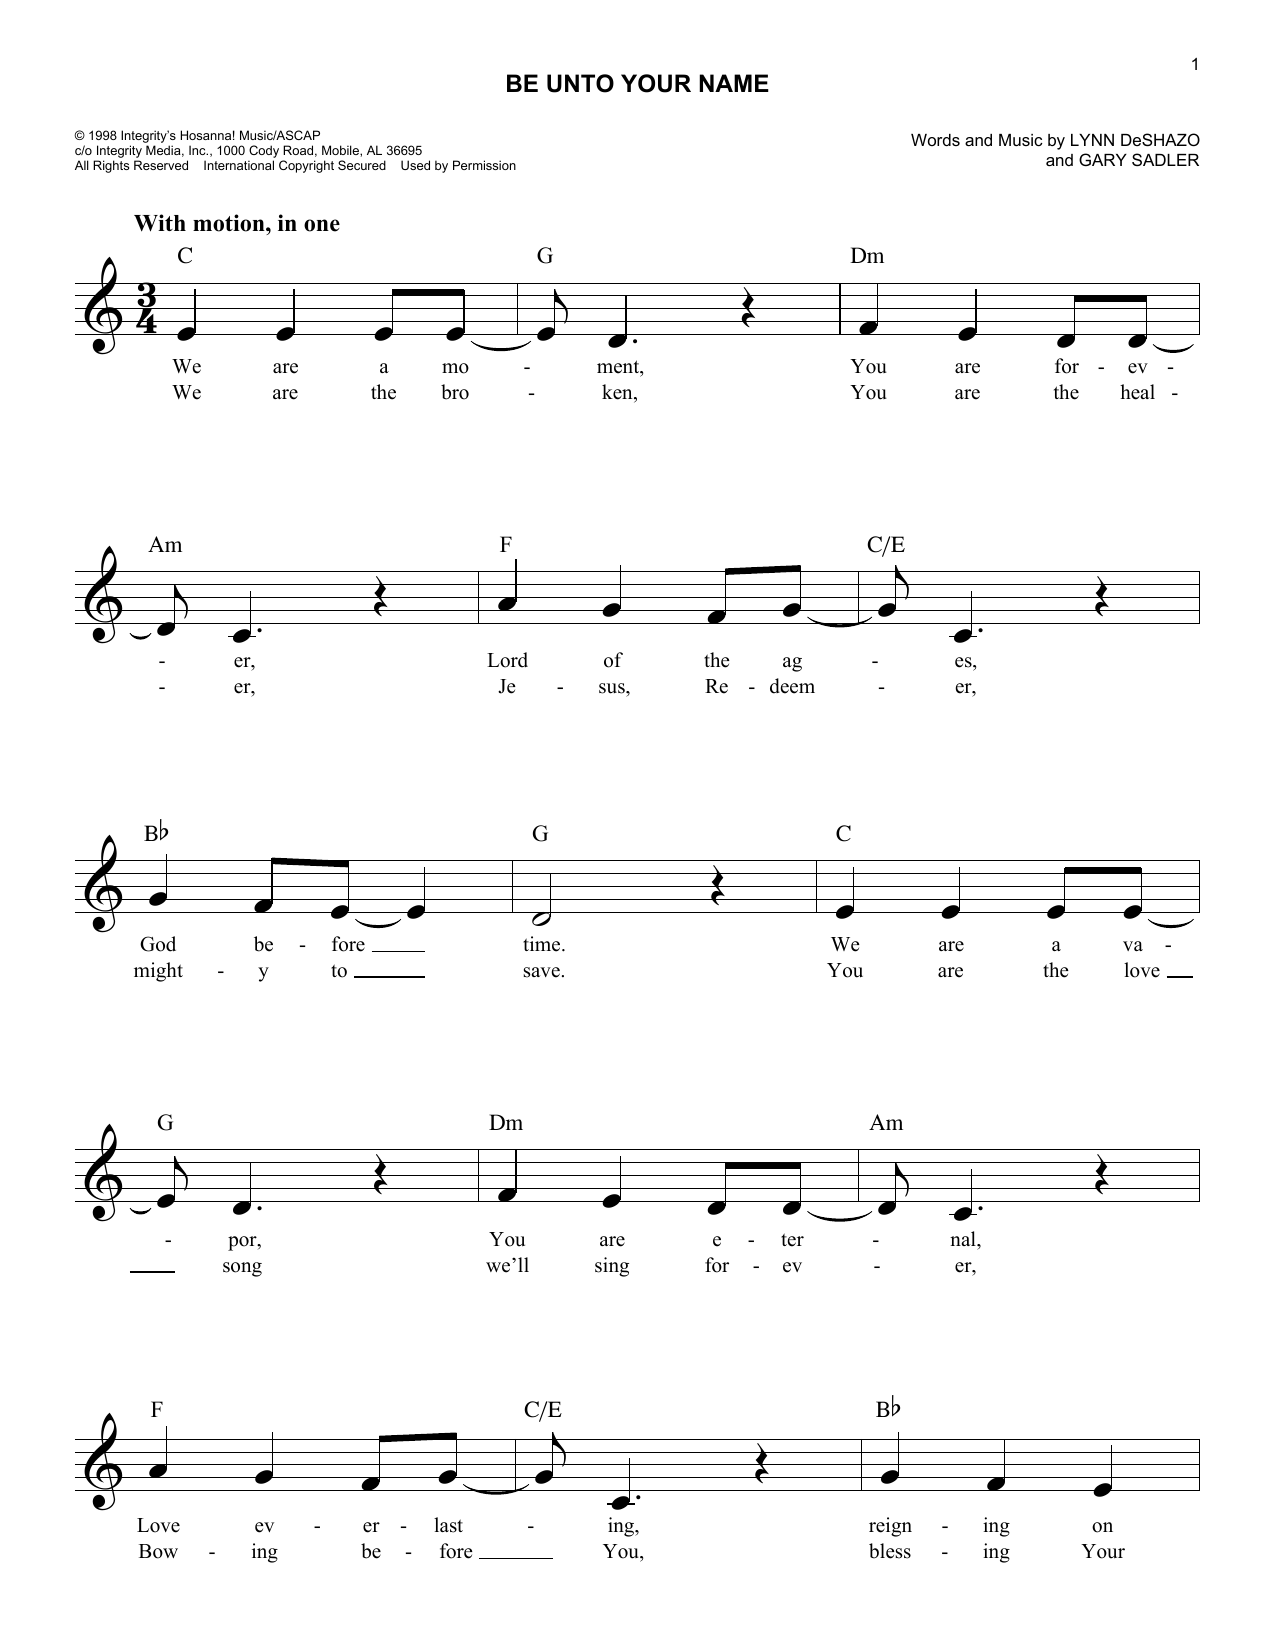 Lynn DeShazo Be Unto Your Name sheet music notes and chords. Download Printable PDF.